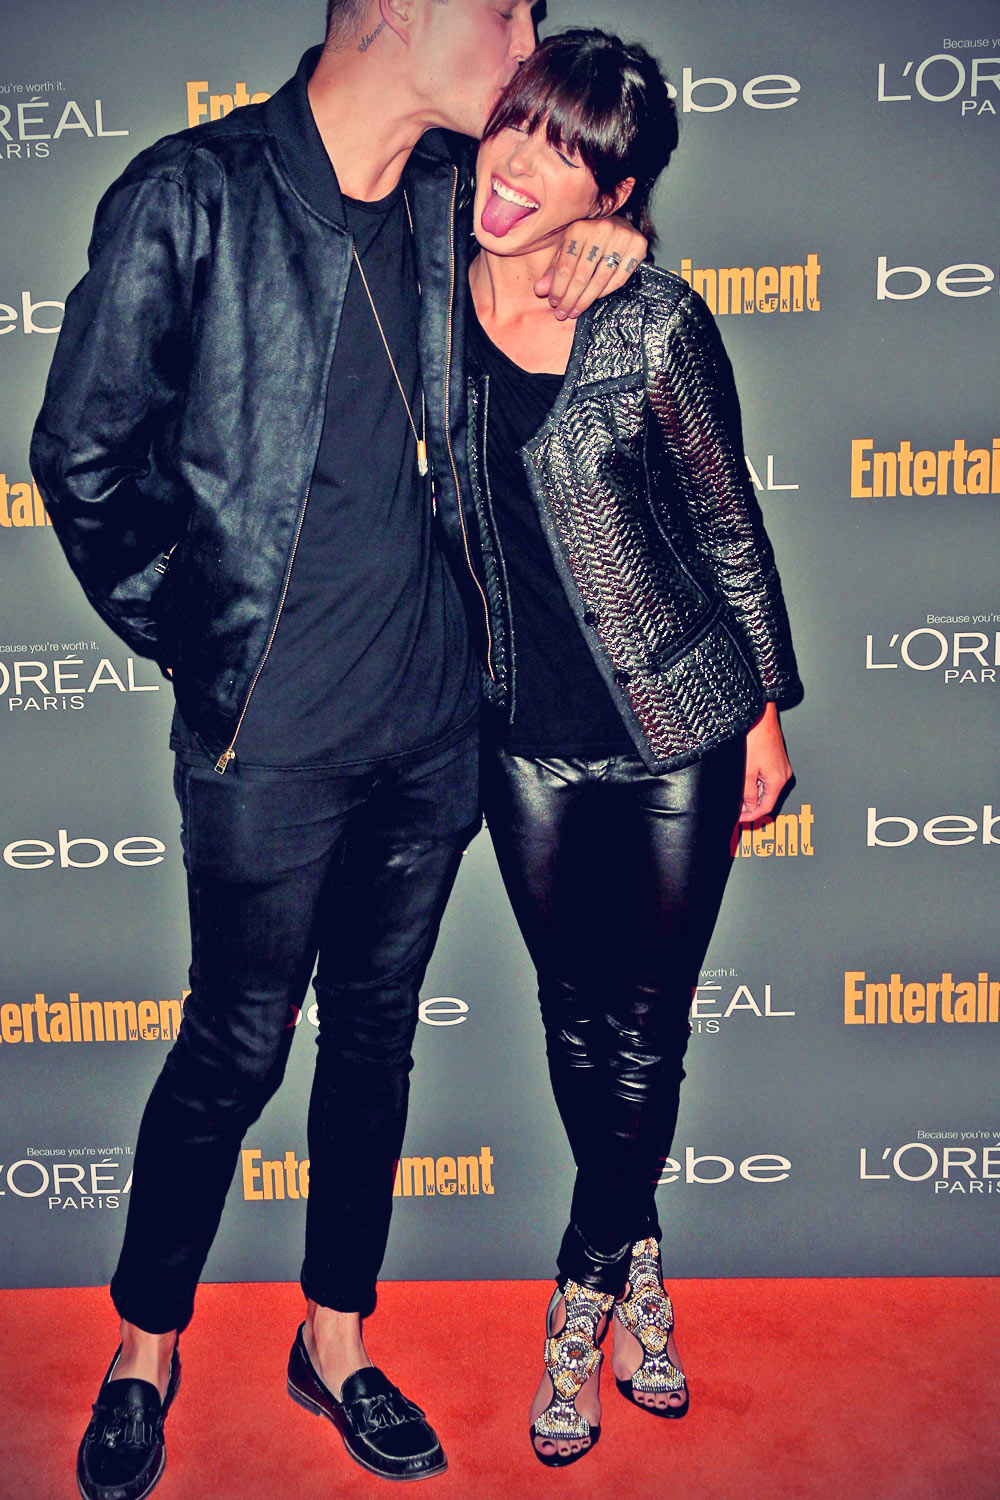 Shenae Grimes attends the Entertainment Weekly’s Pre-Emmy Party